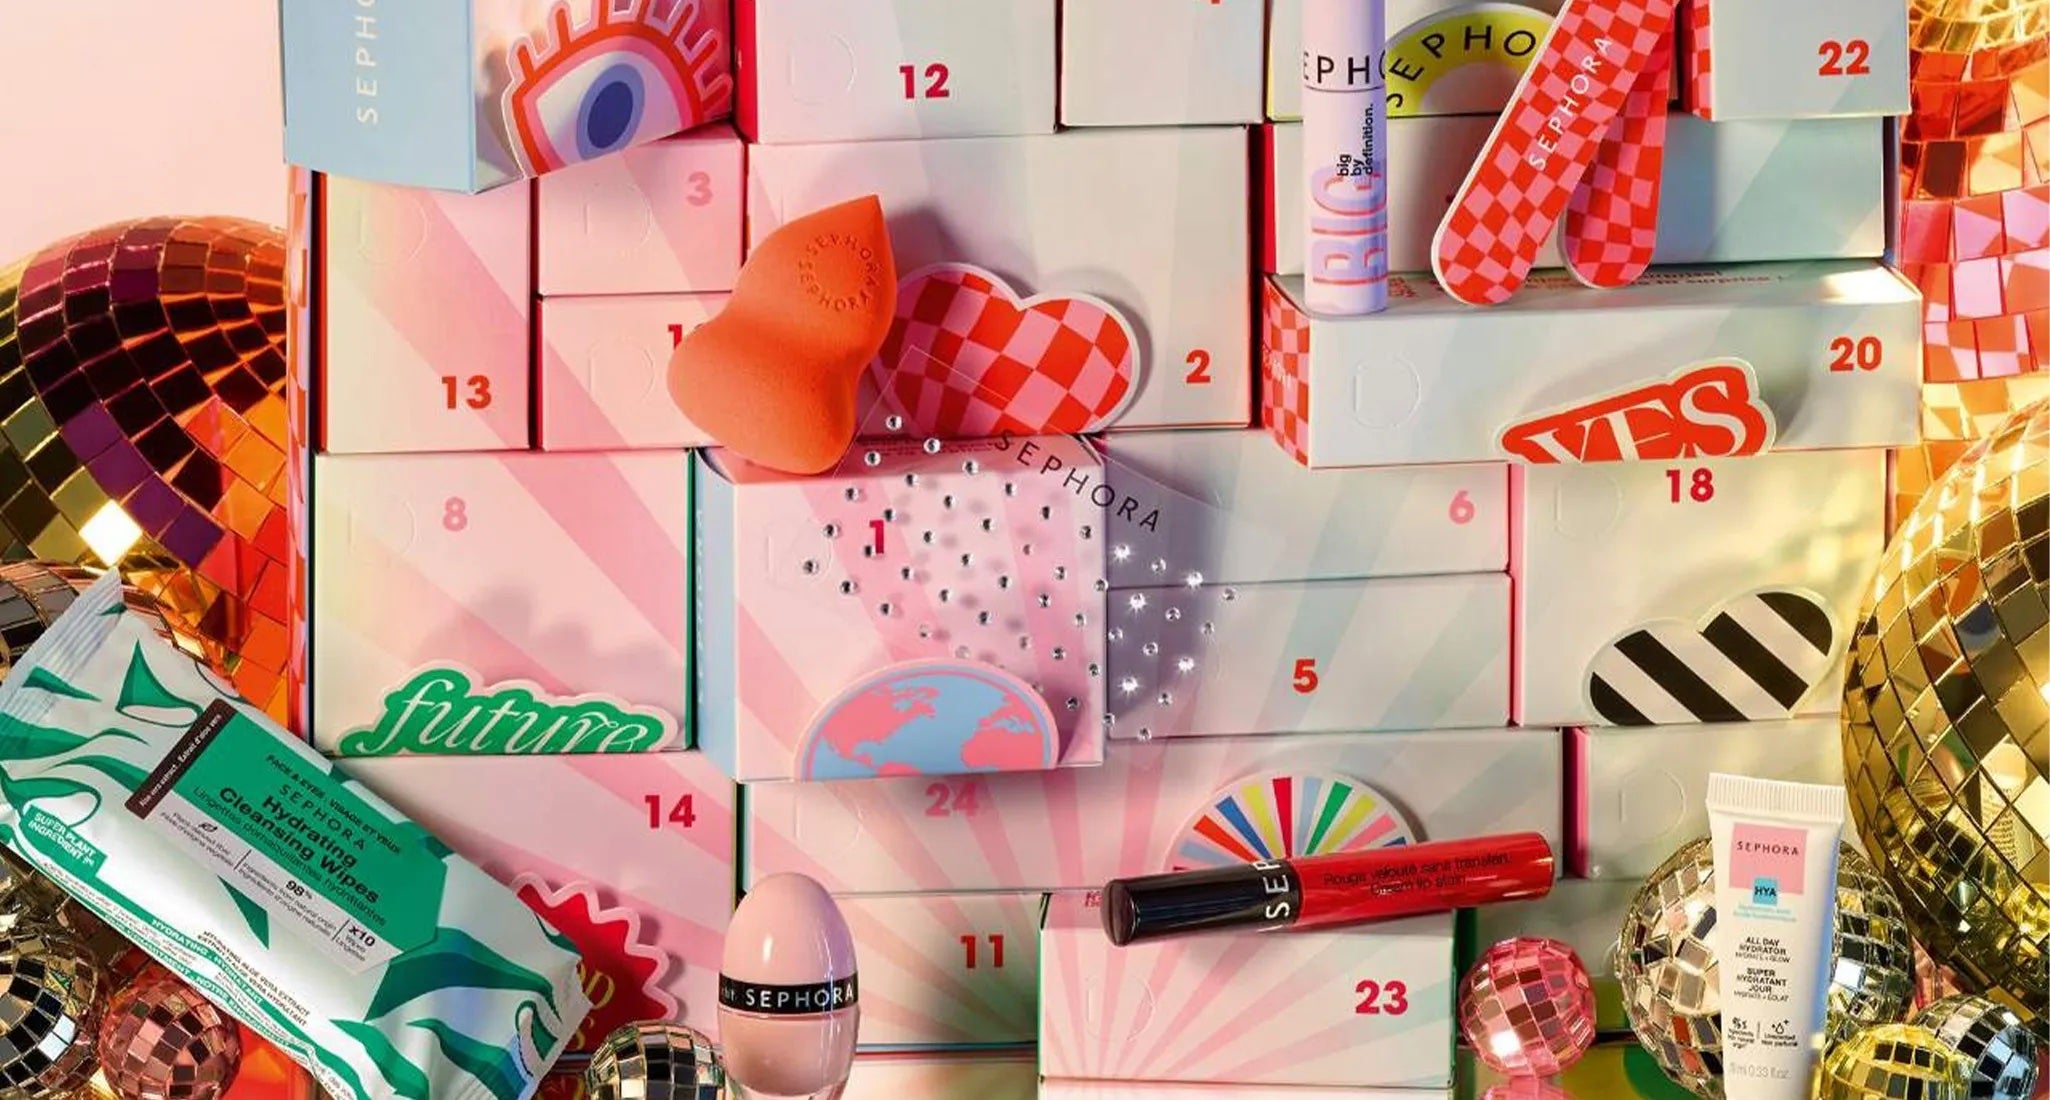 Chanel SOLD OUT EVERYWHERE 2021 Advent Calendar with 27 Gifts